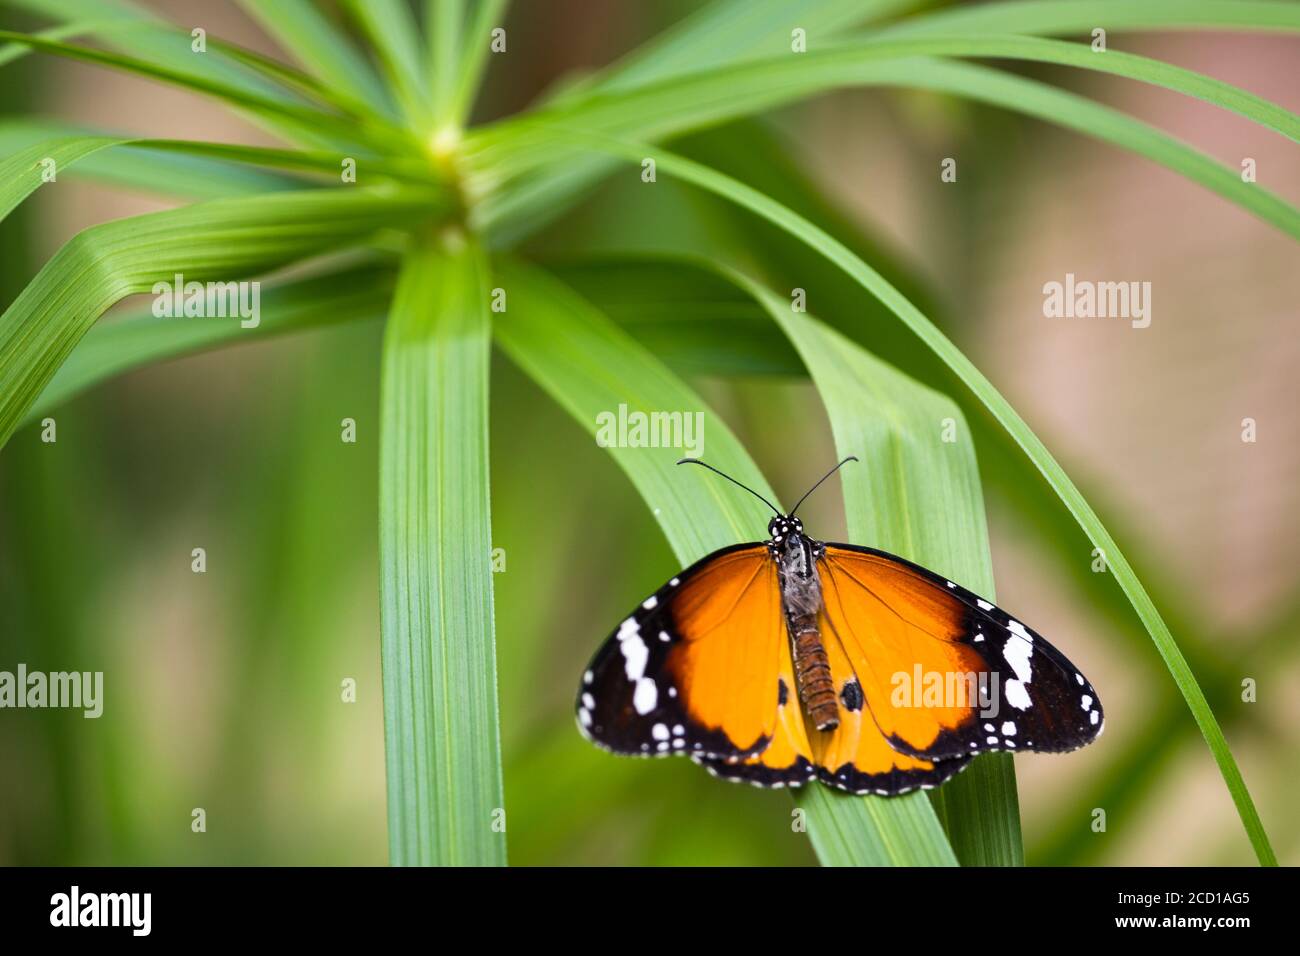 Plain Tiger butterfly sitting on a sword shaped leaf Stock Photo